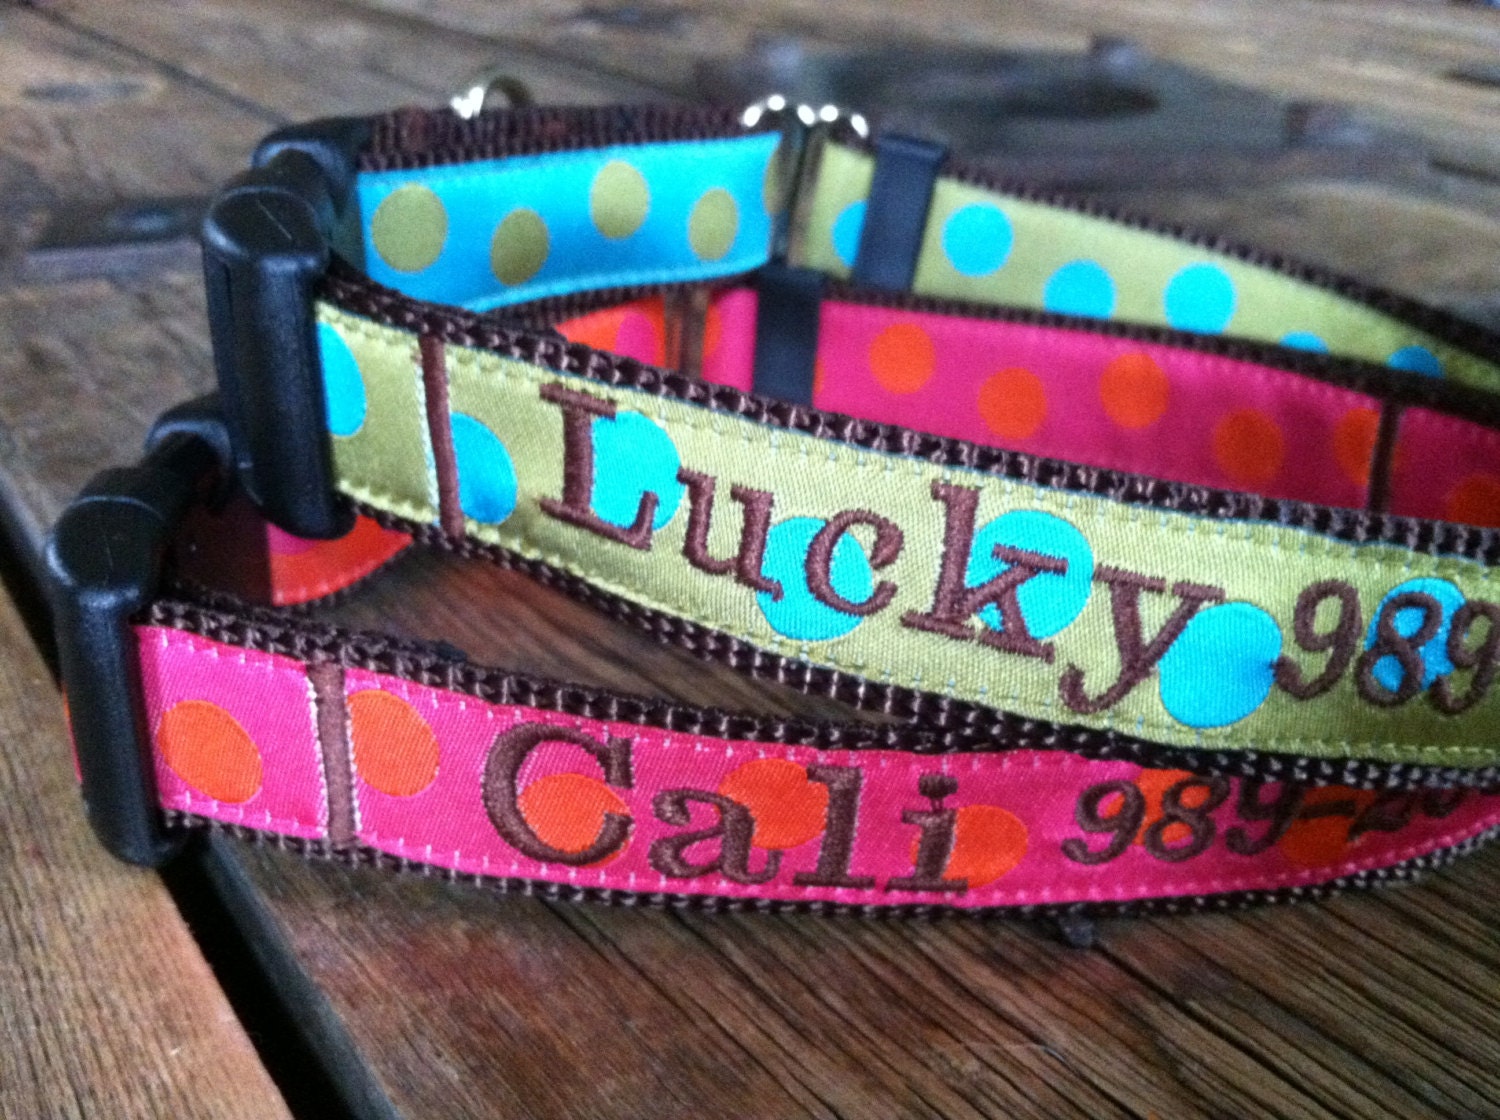 Buckled Personalized Martingale Dog Collar. Personalized Slip